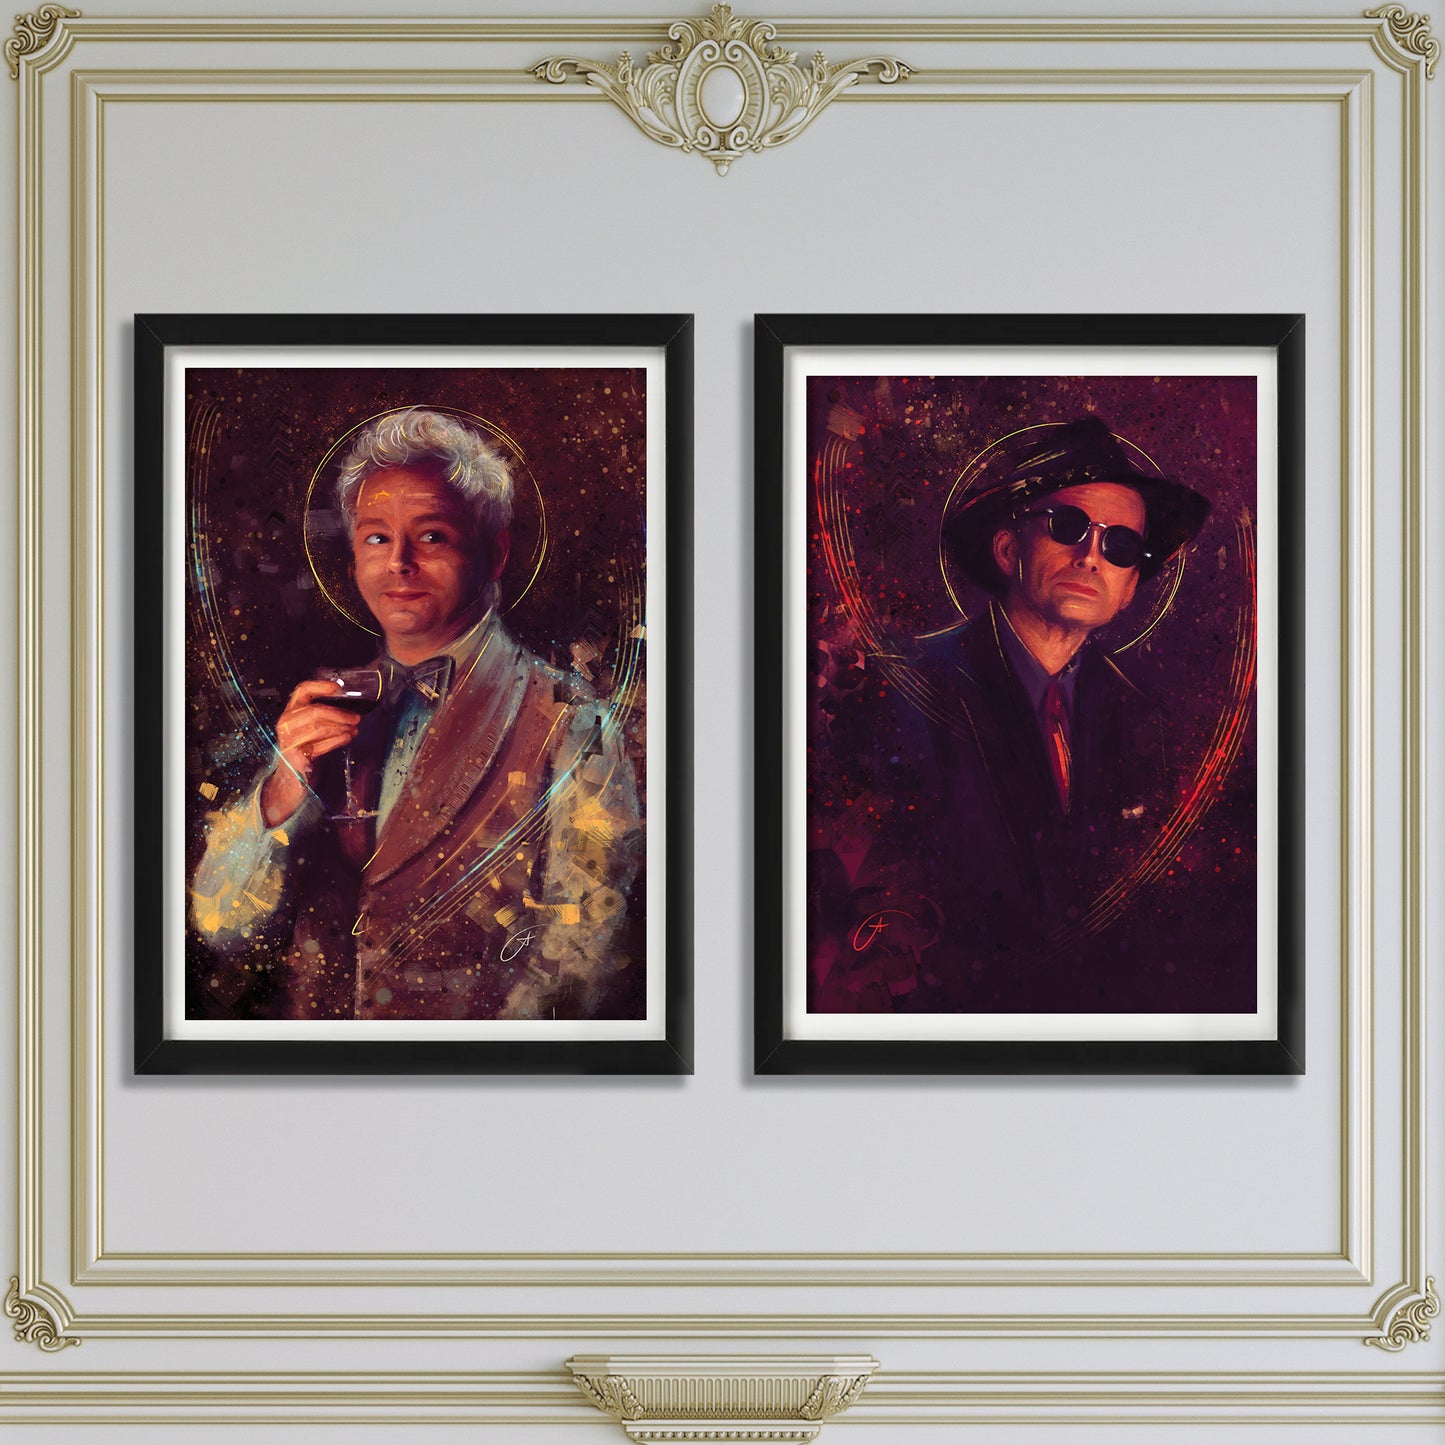 Two black-framed pictures hanging side by side on a white wall, with ornate crown moulding above and below. The  left picture depicts the character Aziraphale, and the right picture depicts Crowley, both from the TV series "Good Omens."